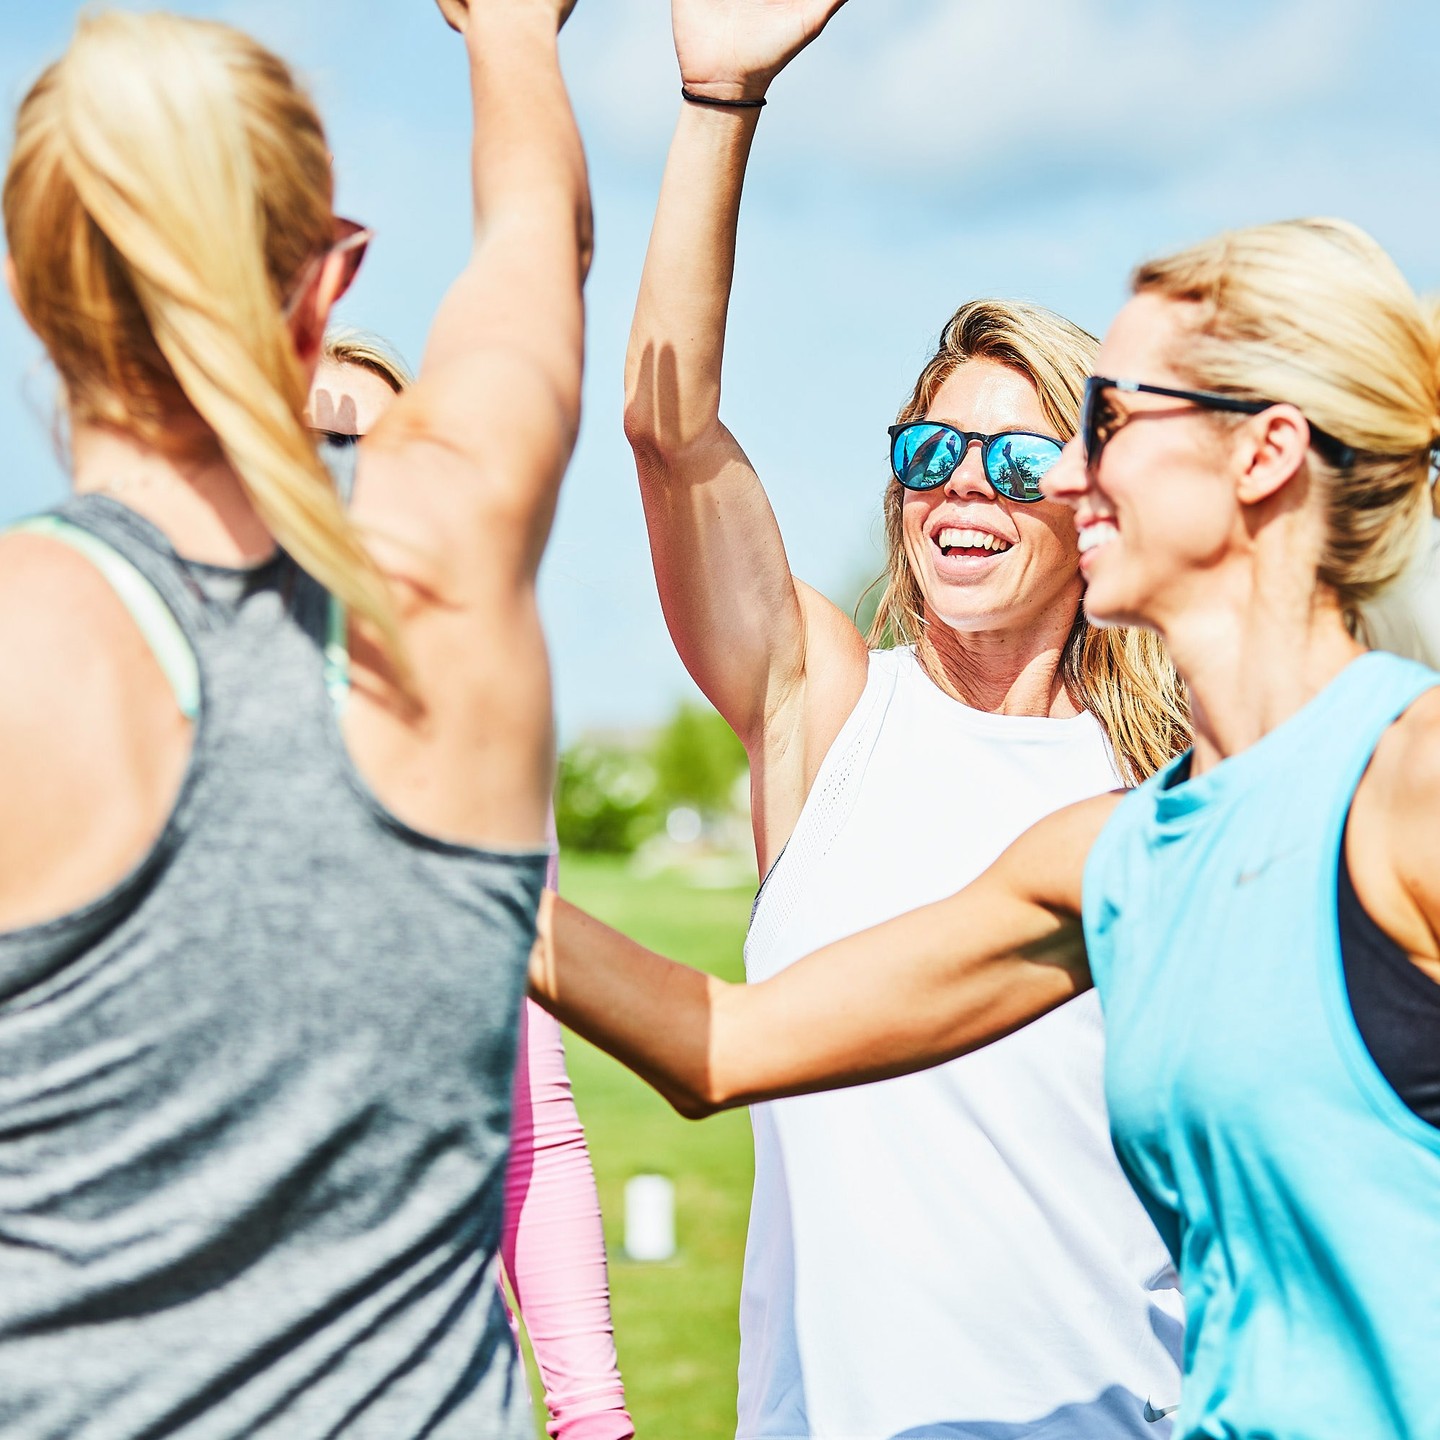 "Those who bring sunshine into the lives of others cannot keep it from themselves." - James M. Barrie
.
.
.
.
#sunshine #exercise #friends #nature #community #aledo #aledotx #moms #mom #dfwhomes #dfwrealestate #realtor #dfwrealtor #texas